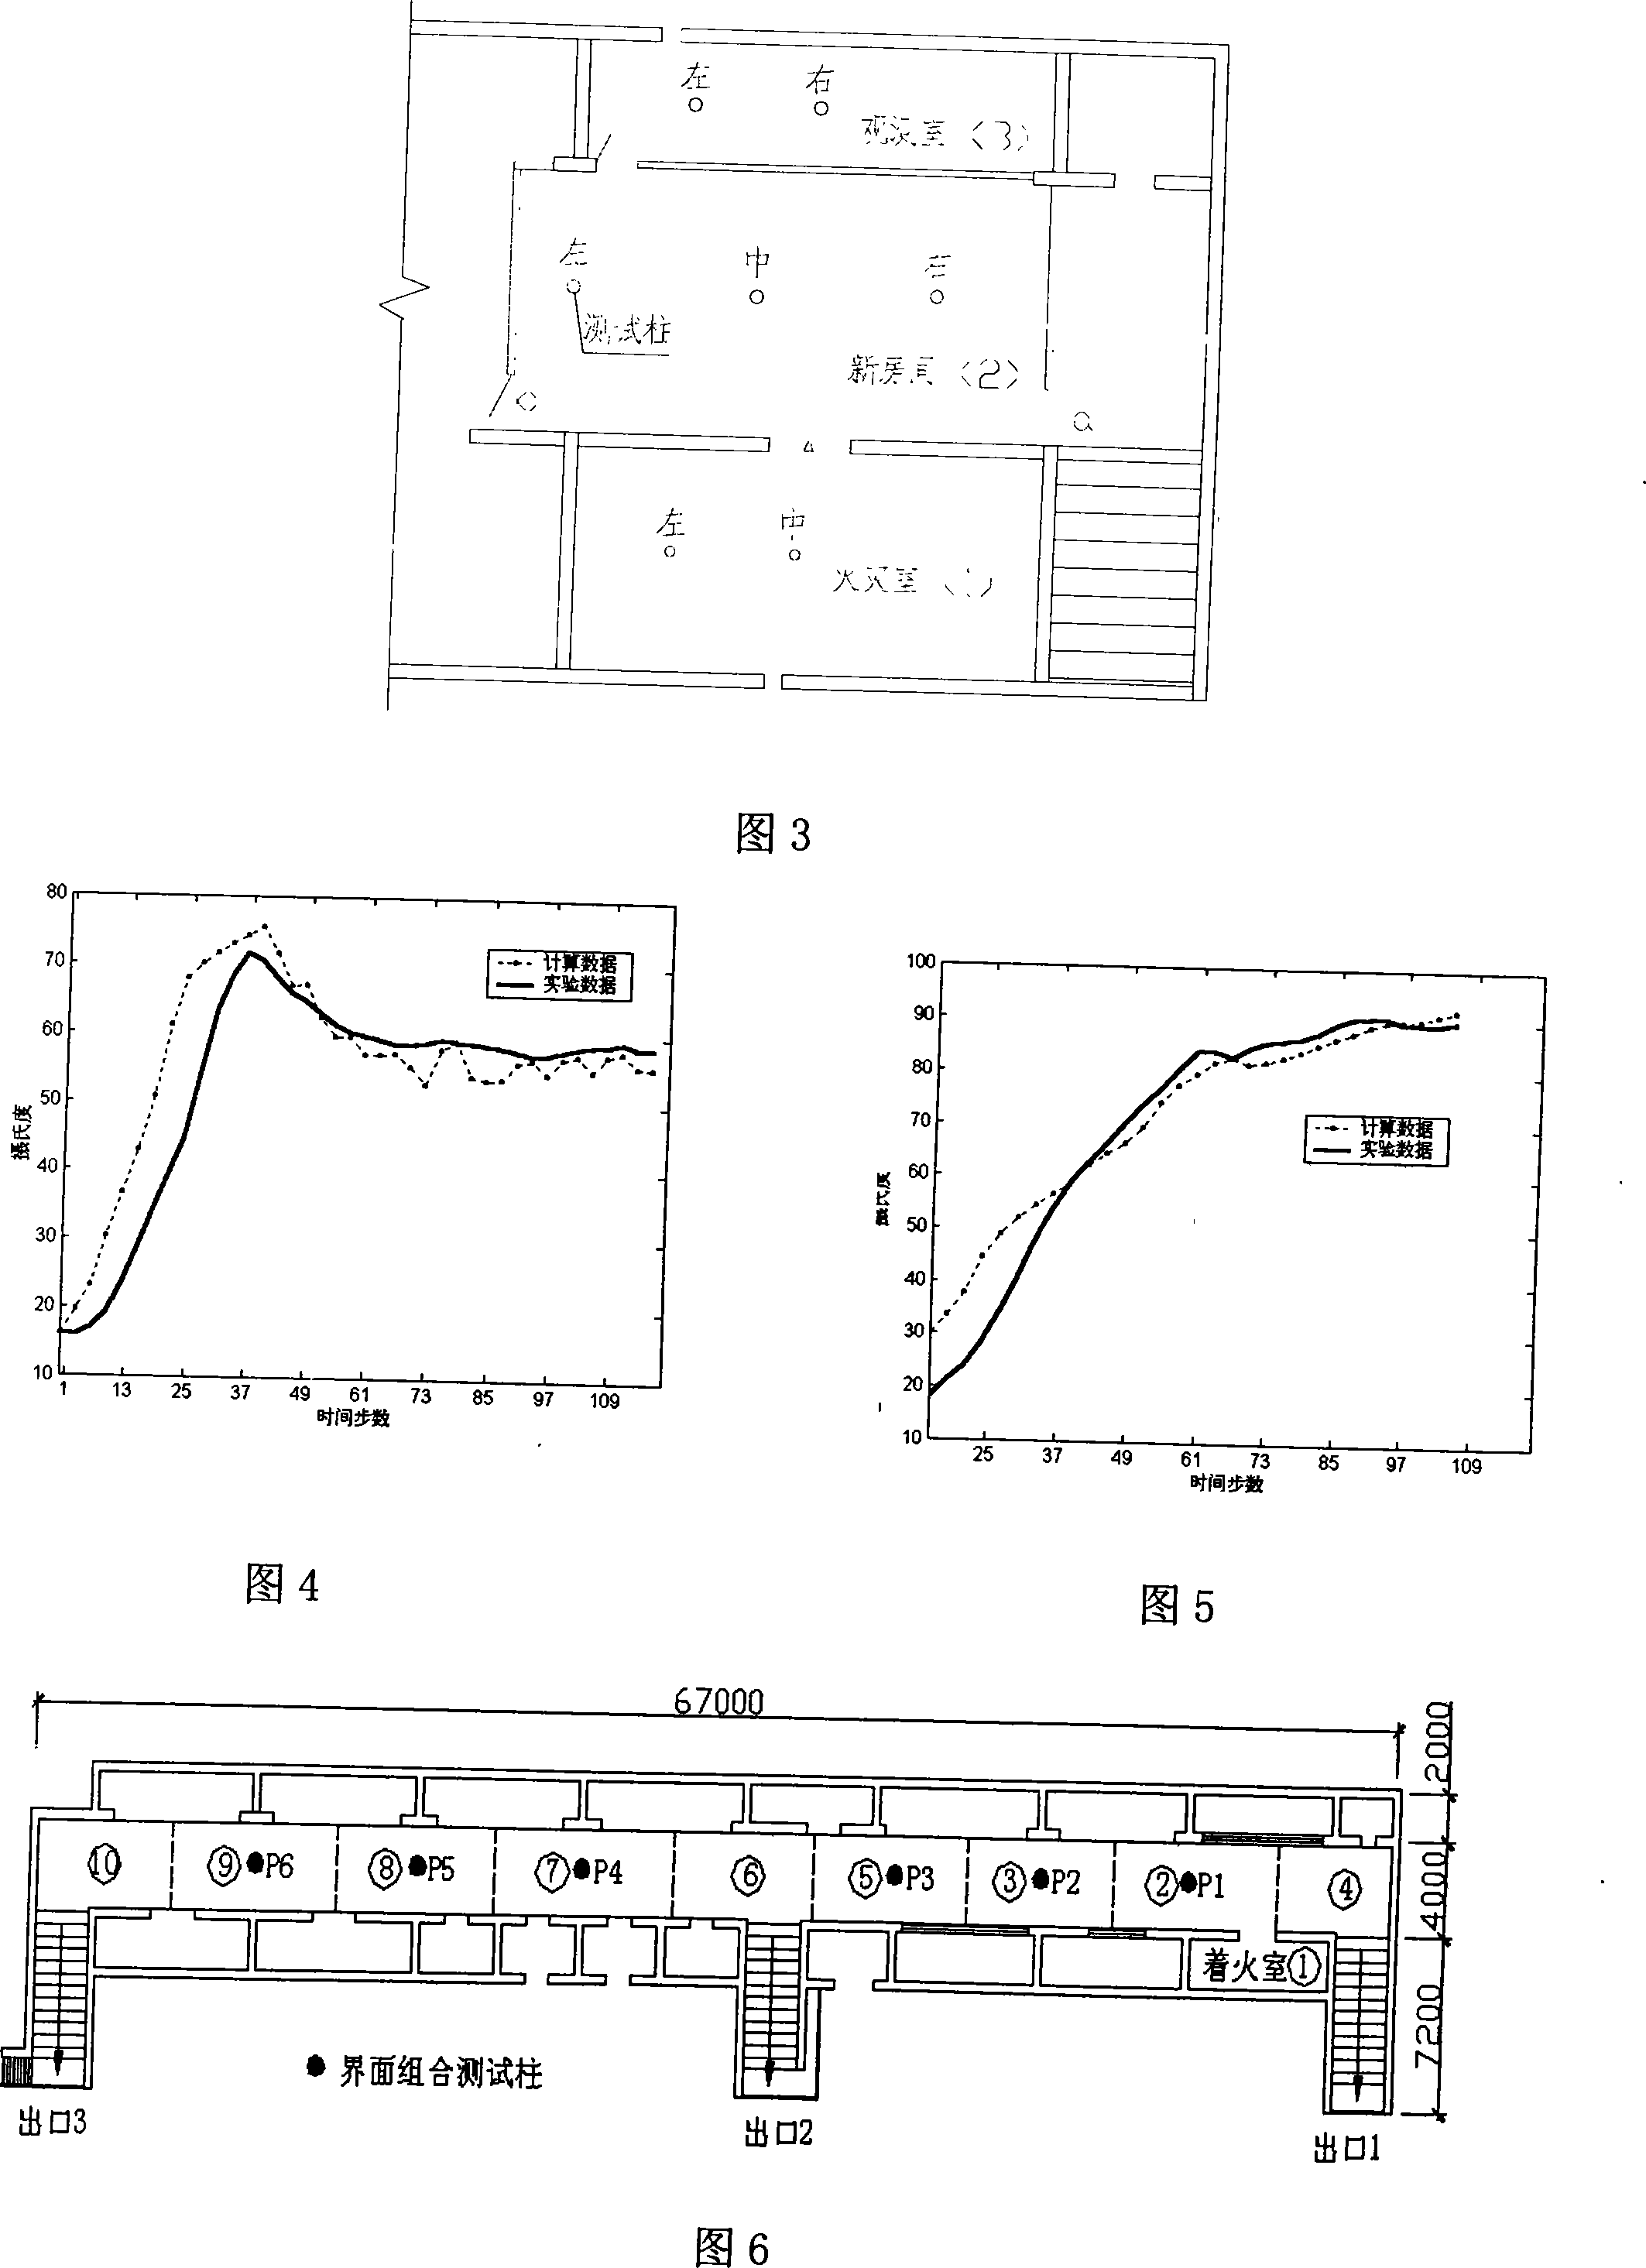 Prediction system and prediction method for building fire smoke flow feature